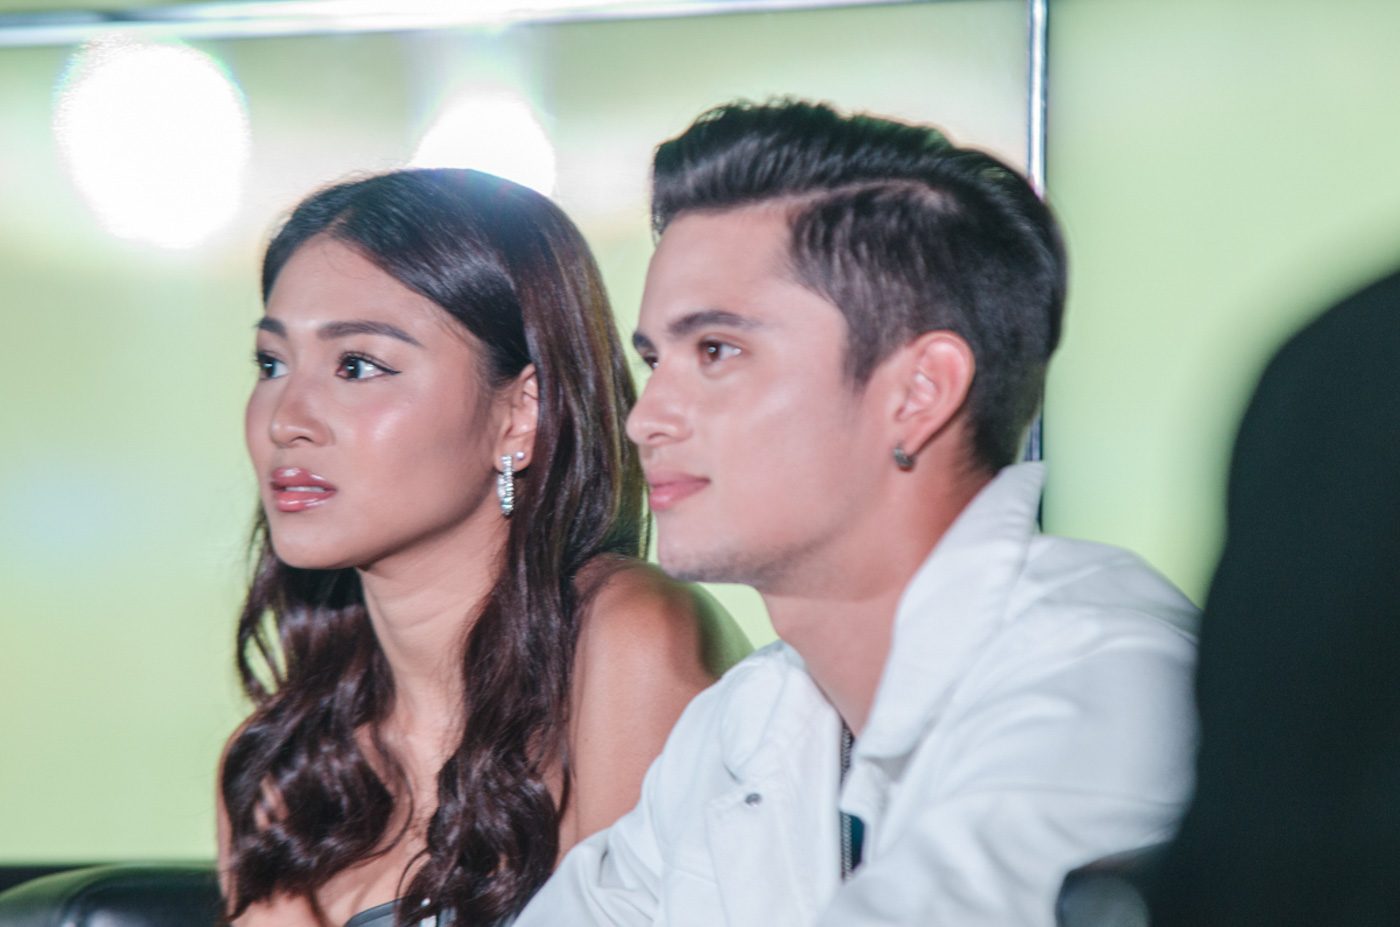 James Reid, Nadine Lustre open up about each other post-breakup